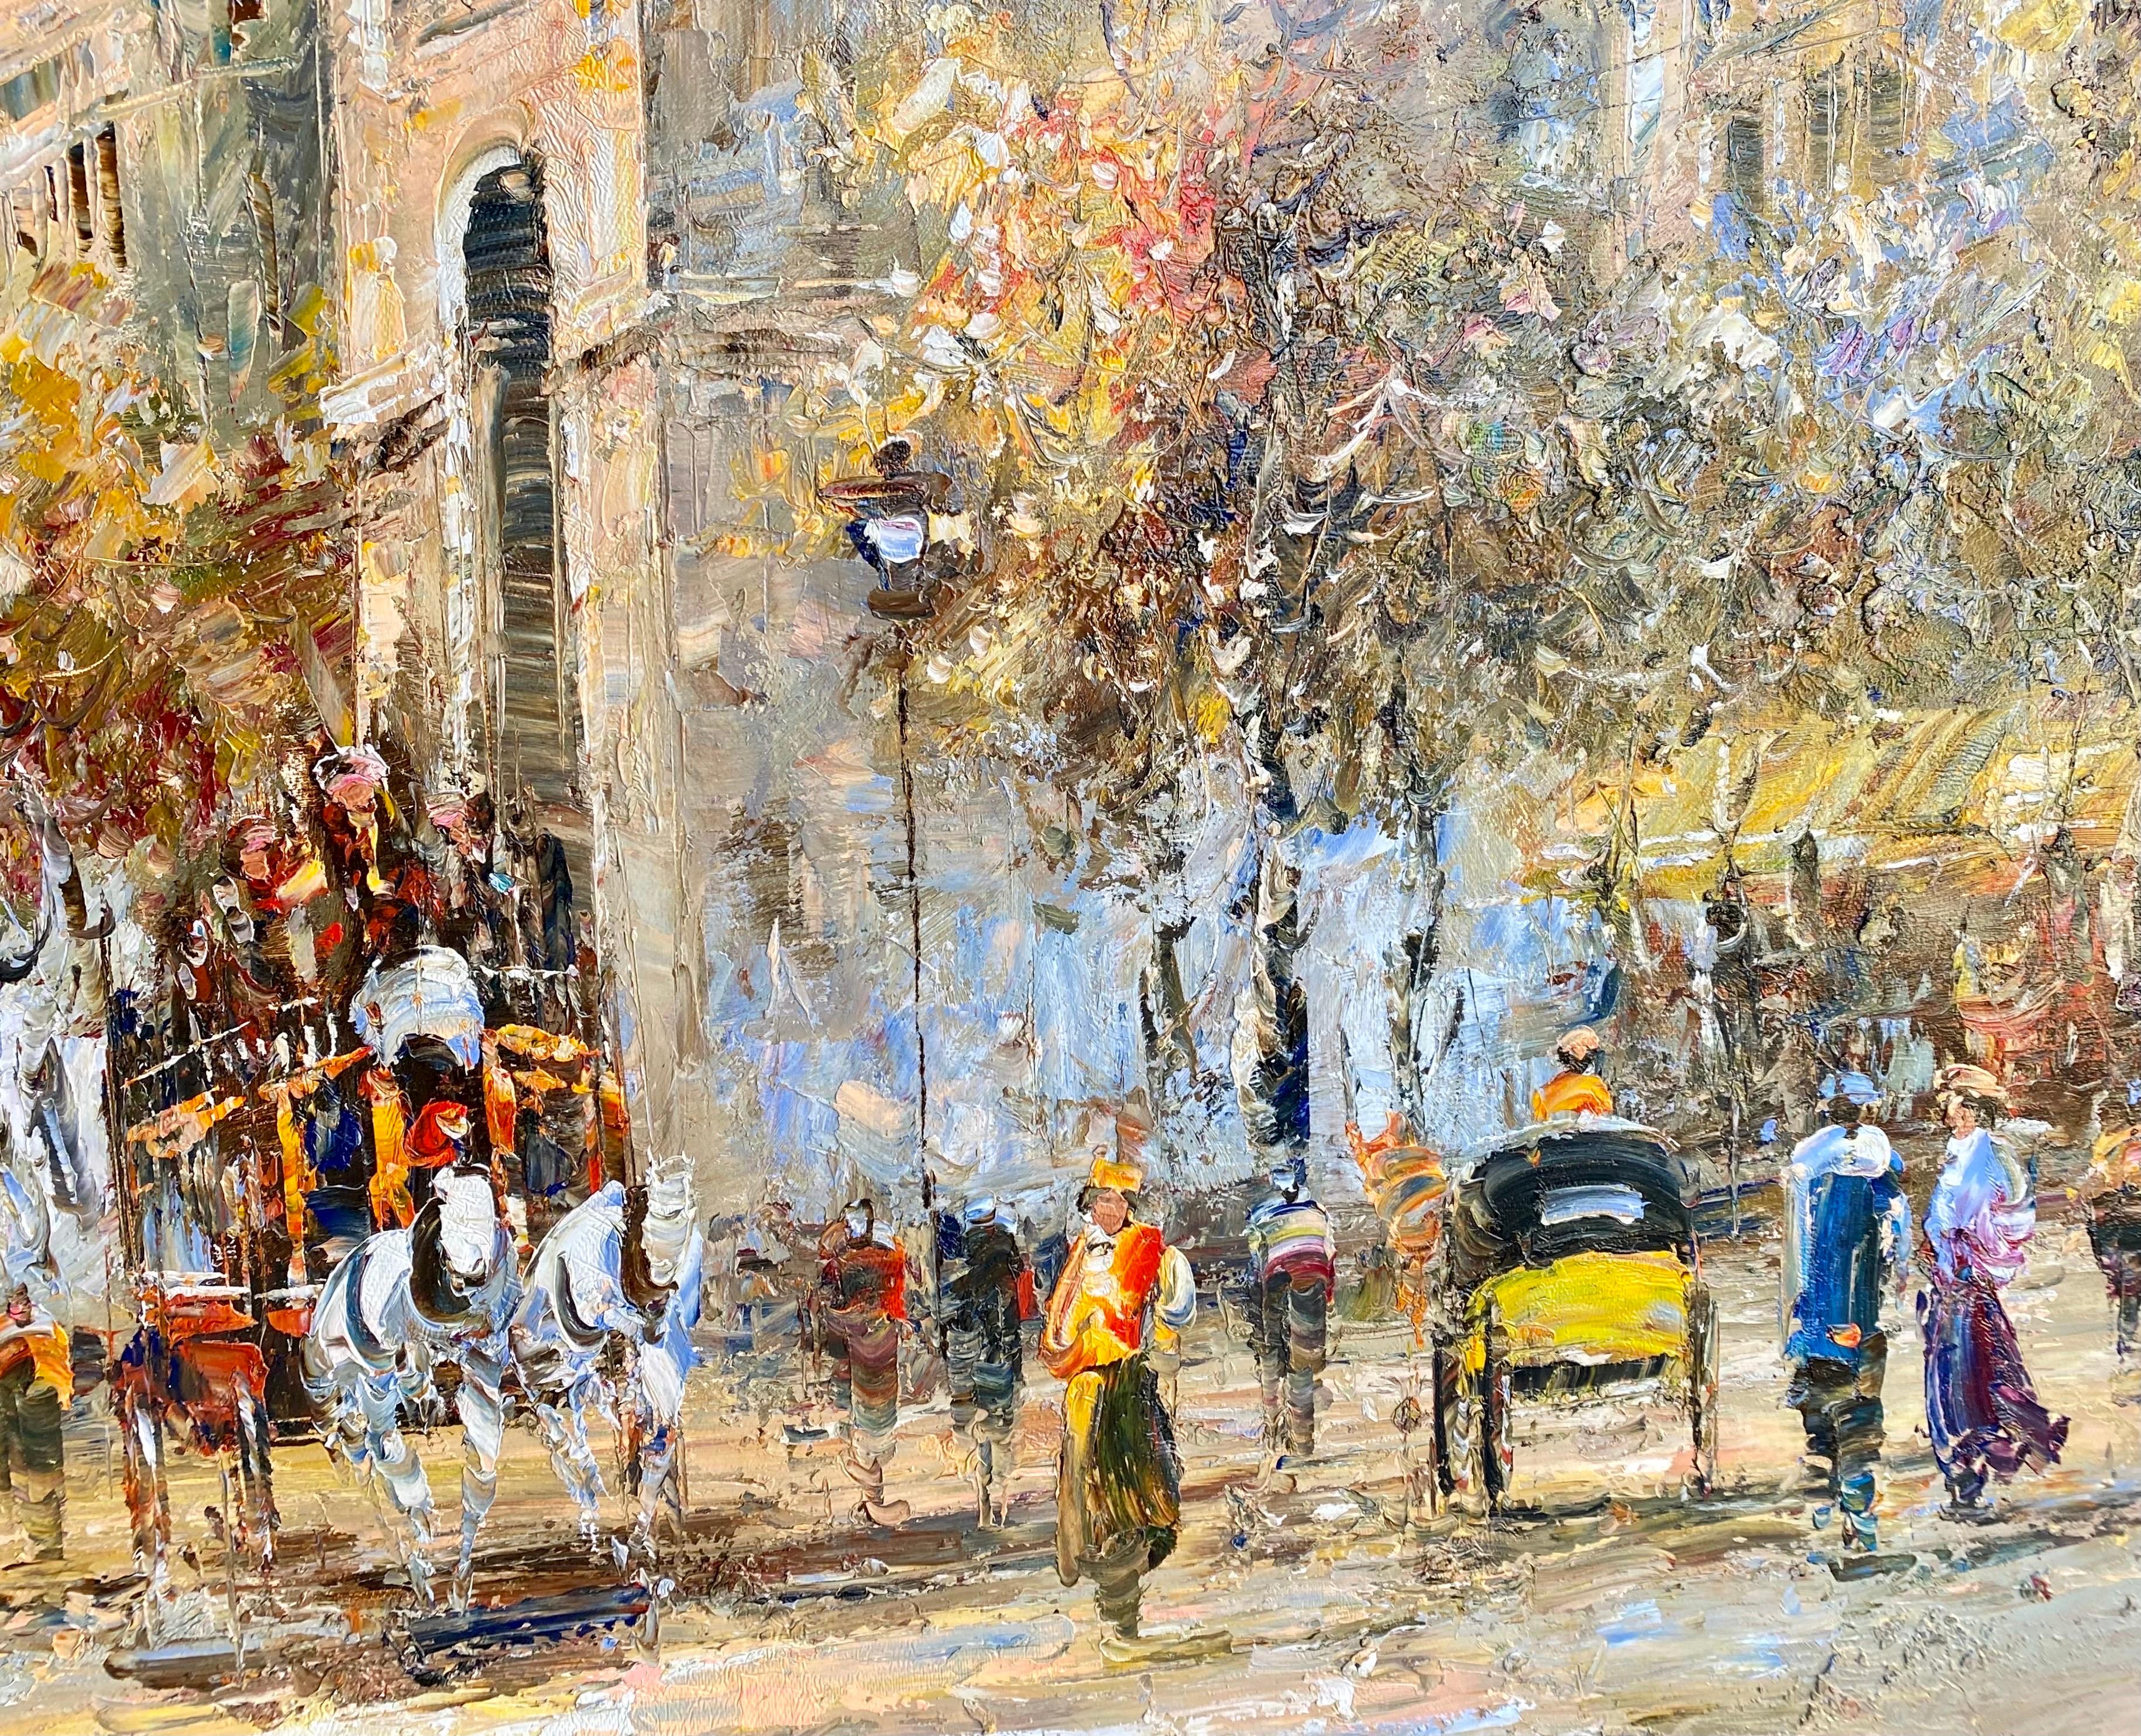 Huge French impressionist painting depicting the Porte Saint-Martin in Paris, in the style of the late 19th century. 

The Porte Saint-Martin is a Parisian monument located at the crossing of Rue Saint-Martin, Rue du Faubourg Saint-Martin and the